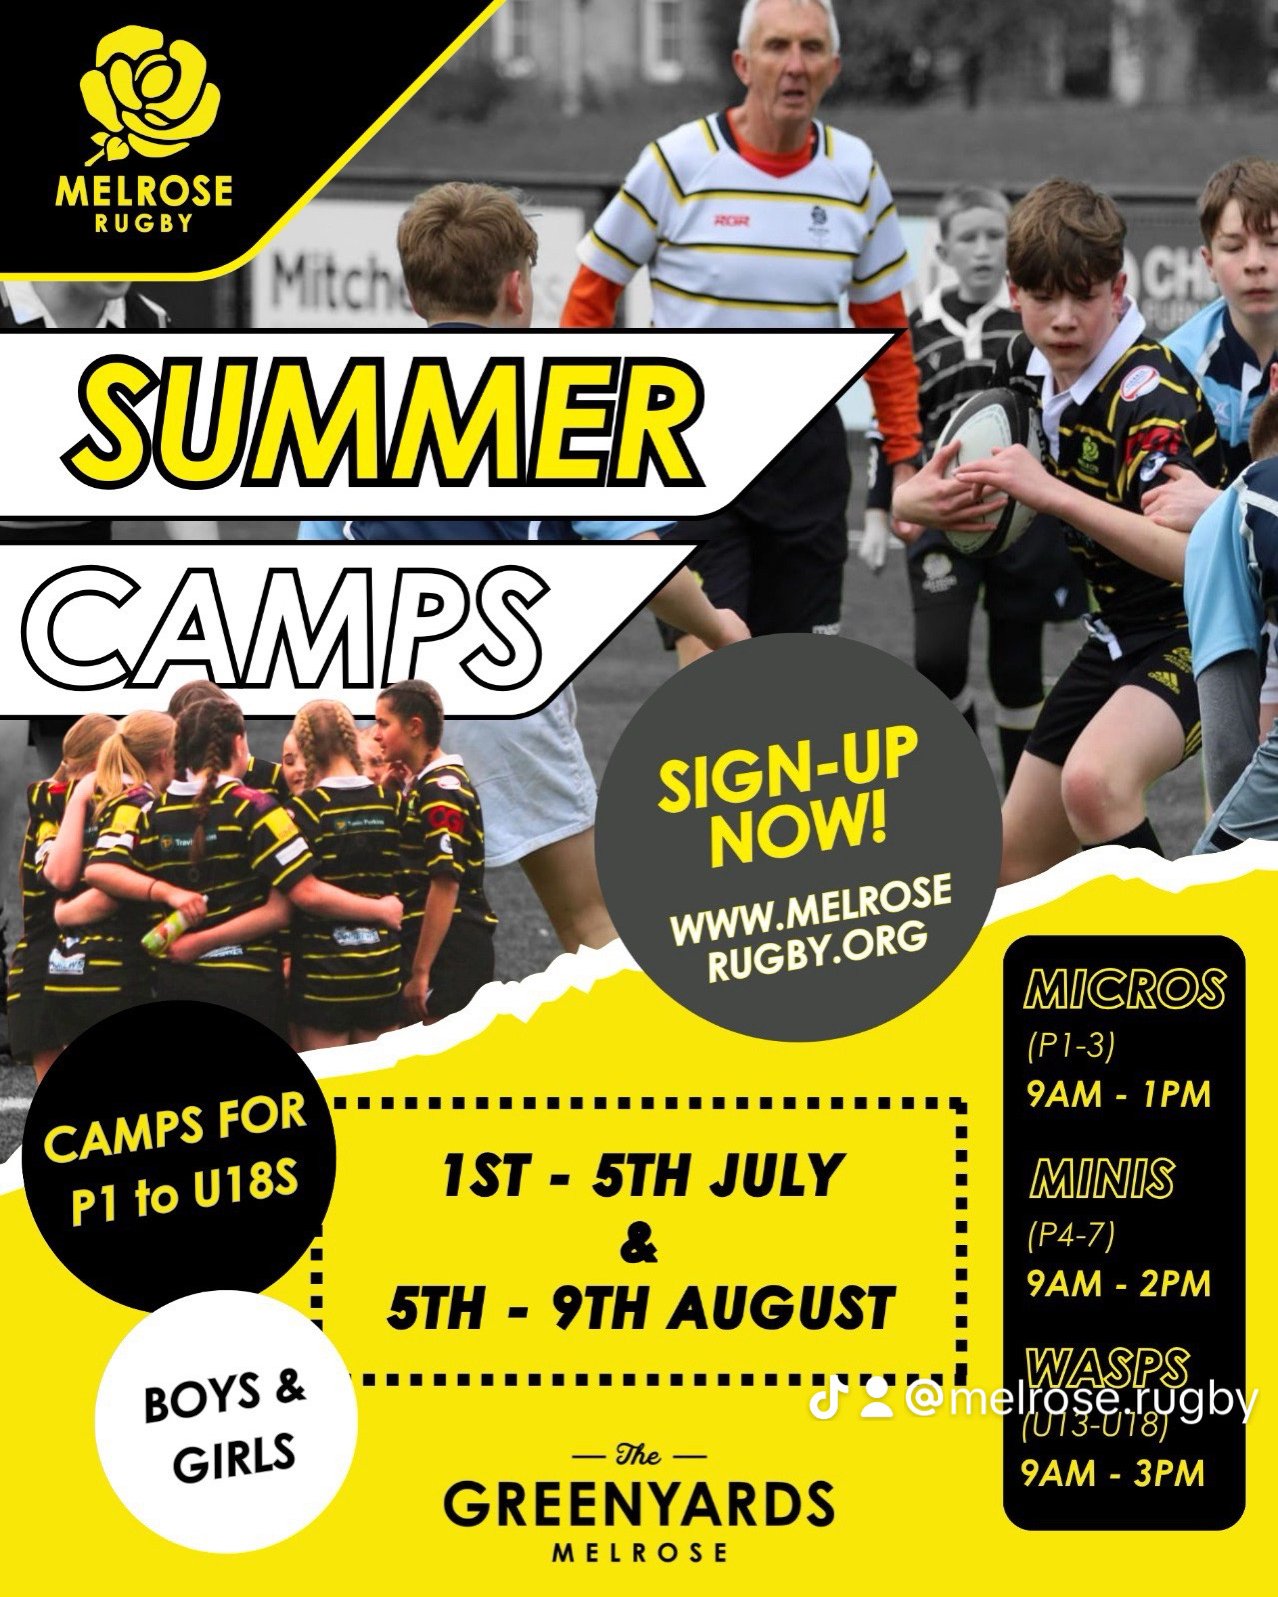 𝗠𝗲𝗹𝗿𝗼𝘀𝗲 𝗥𝘂𝗴𝗯𝘆 𝗖𝗮𝗺𝗽𝘀

Our summer camps are filling up fast. Book now to avoid missing out‼️ ⬇️ 

🔗 in bio - https://www.melroserugby.org/rugby-camps

#Rugby #Scotland #YouthRugby